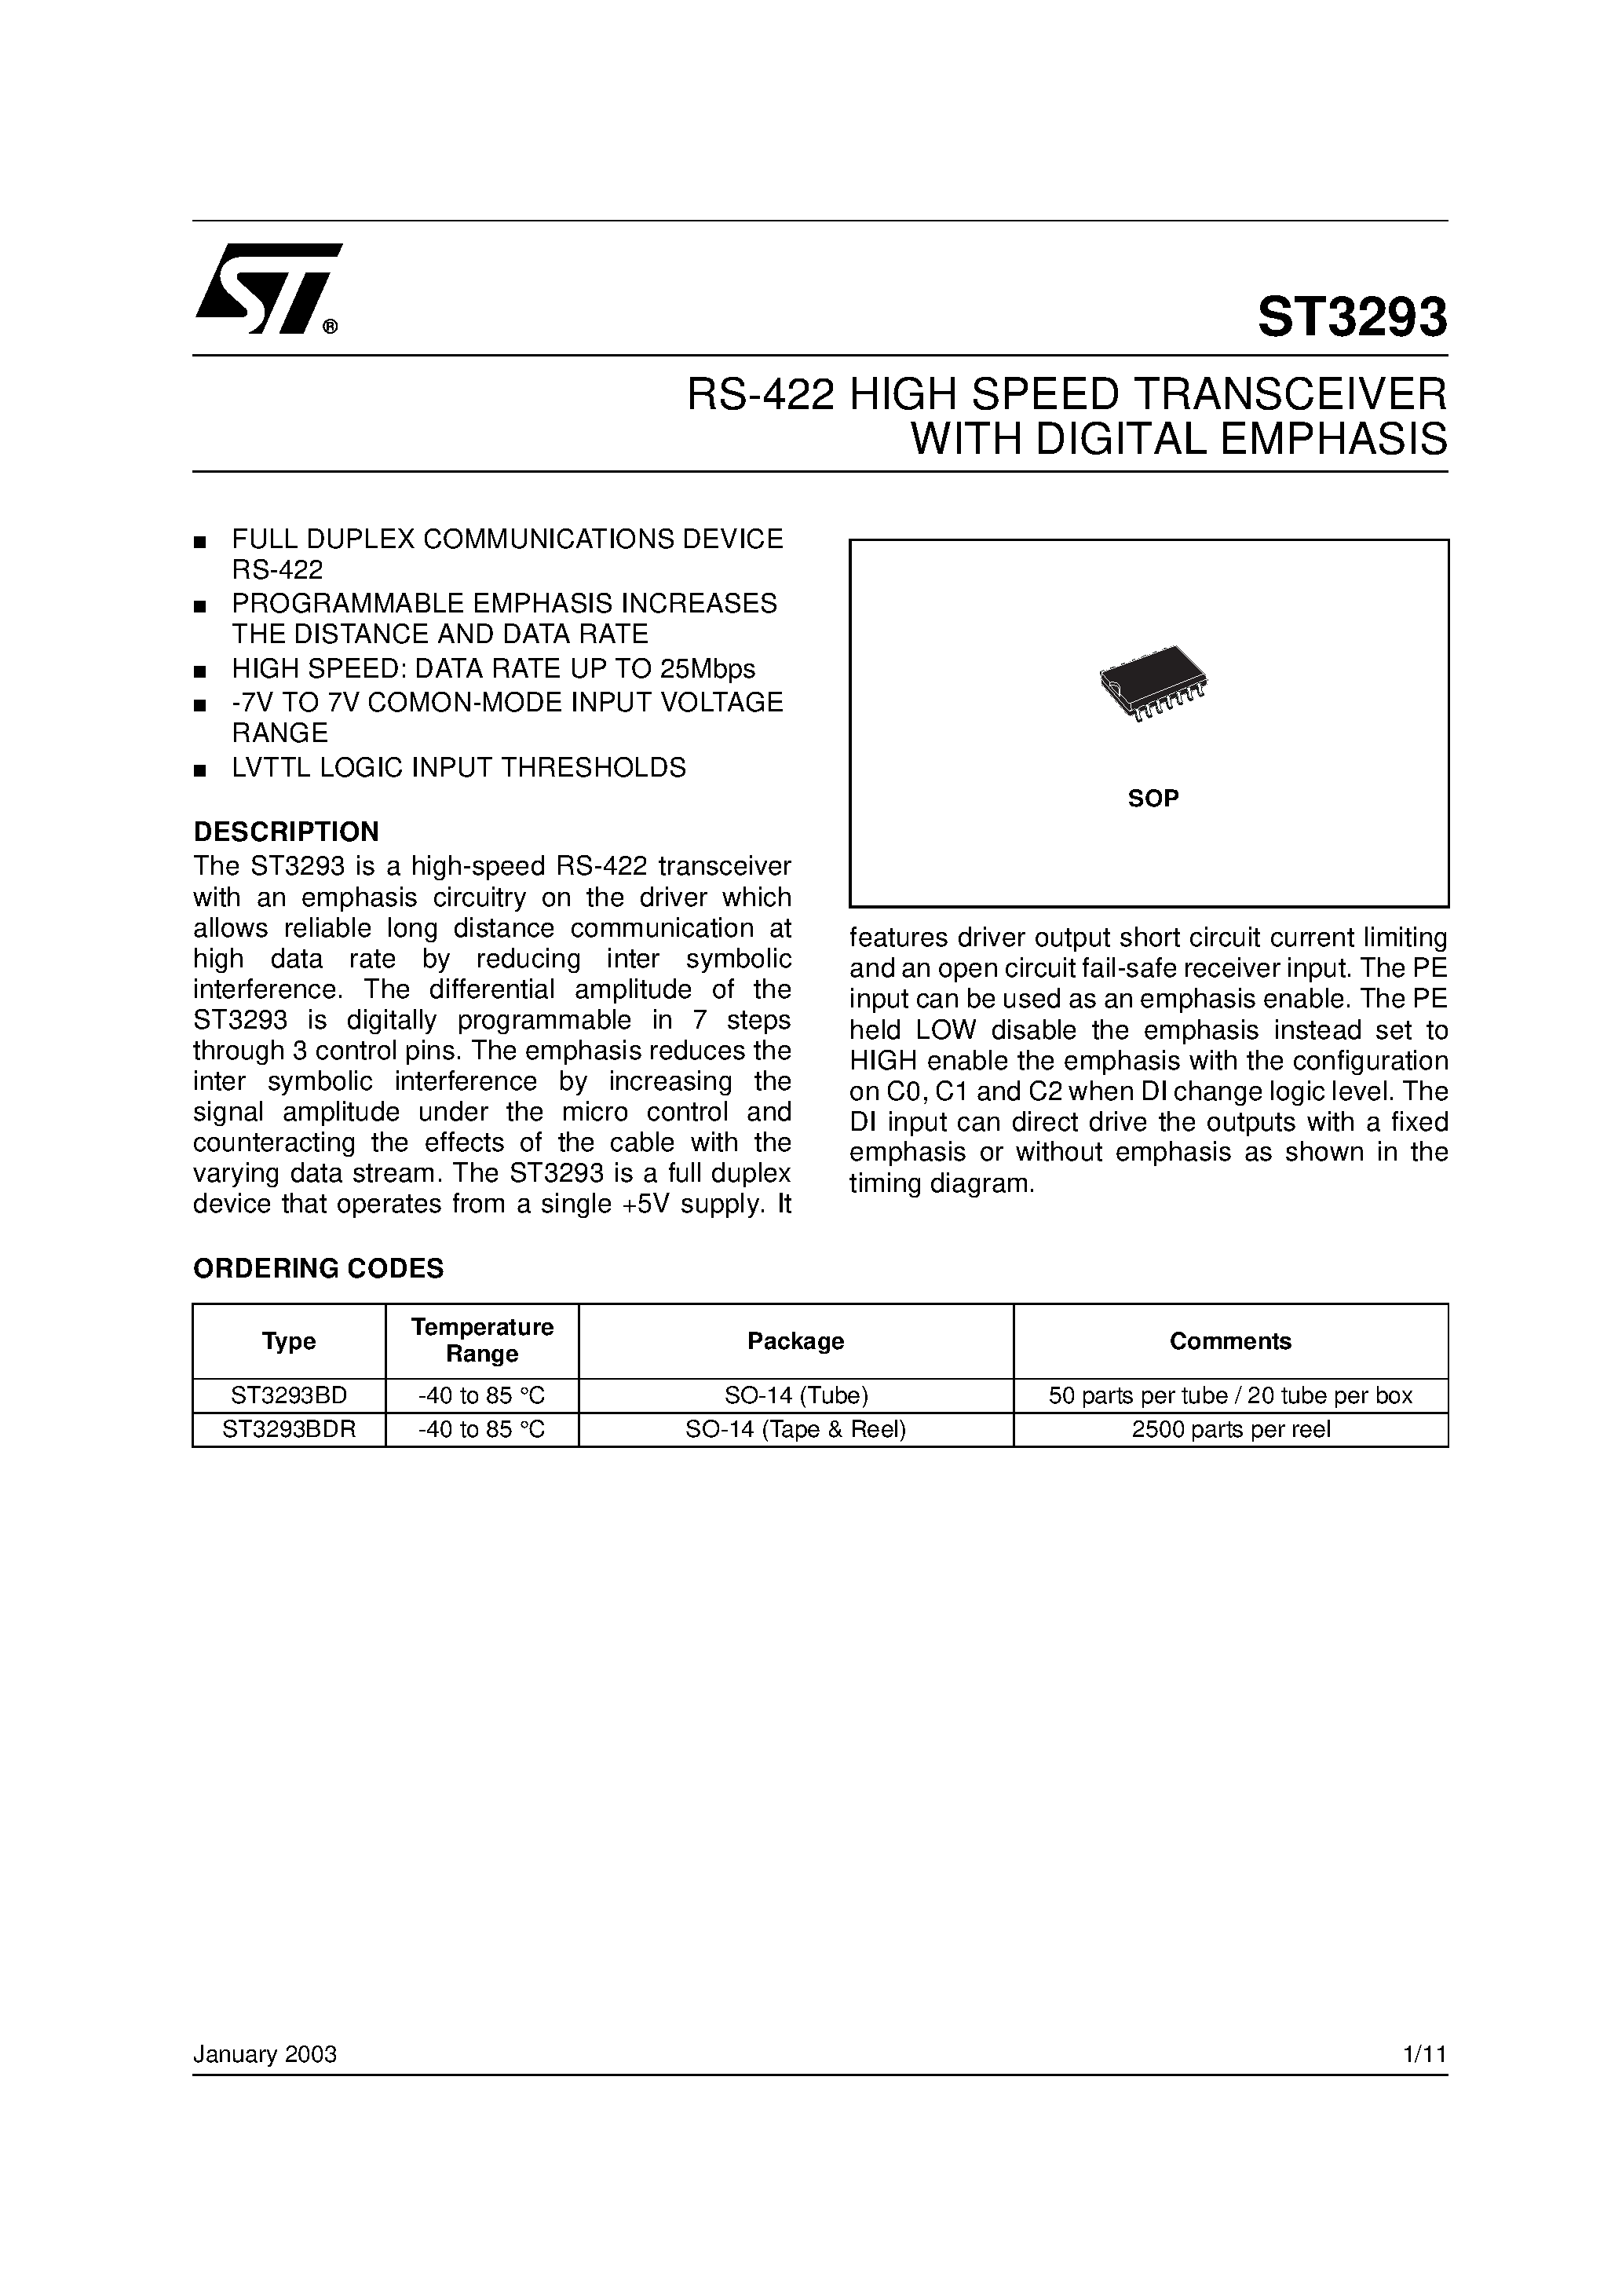 Datasheet ST3293 - RS-422 HIGH SPEED TRANSCEIVER WITH DIGITAL EMPHASIS page 1